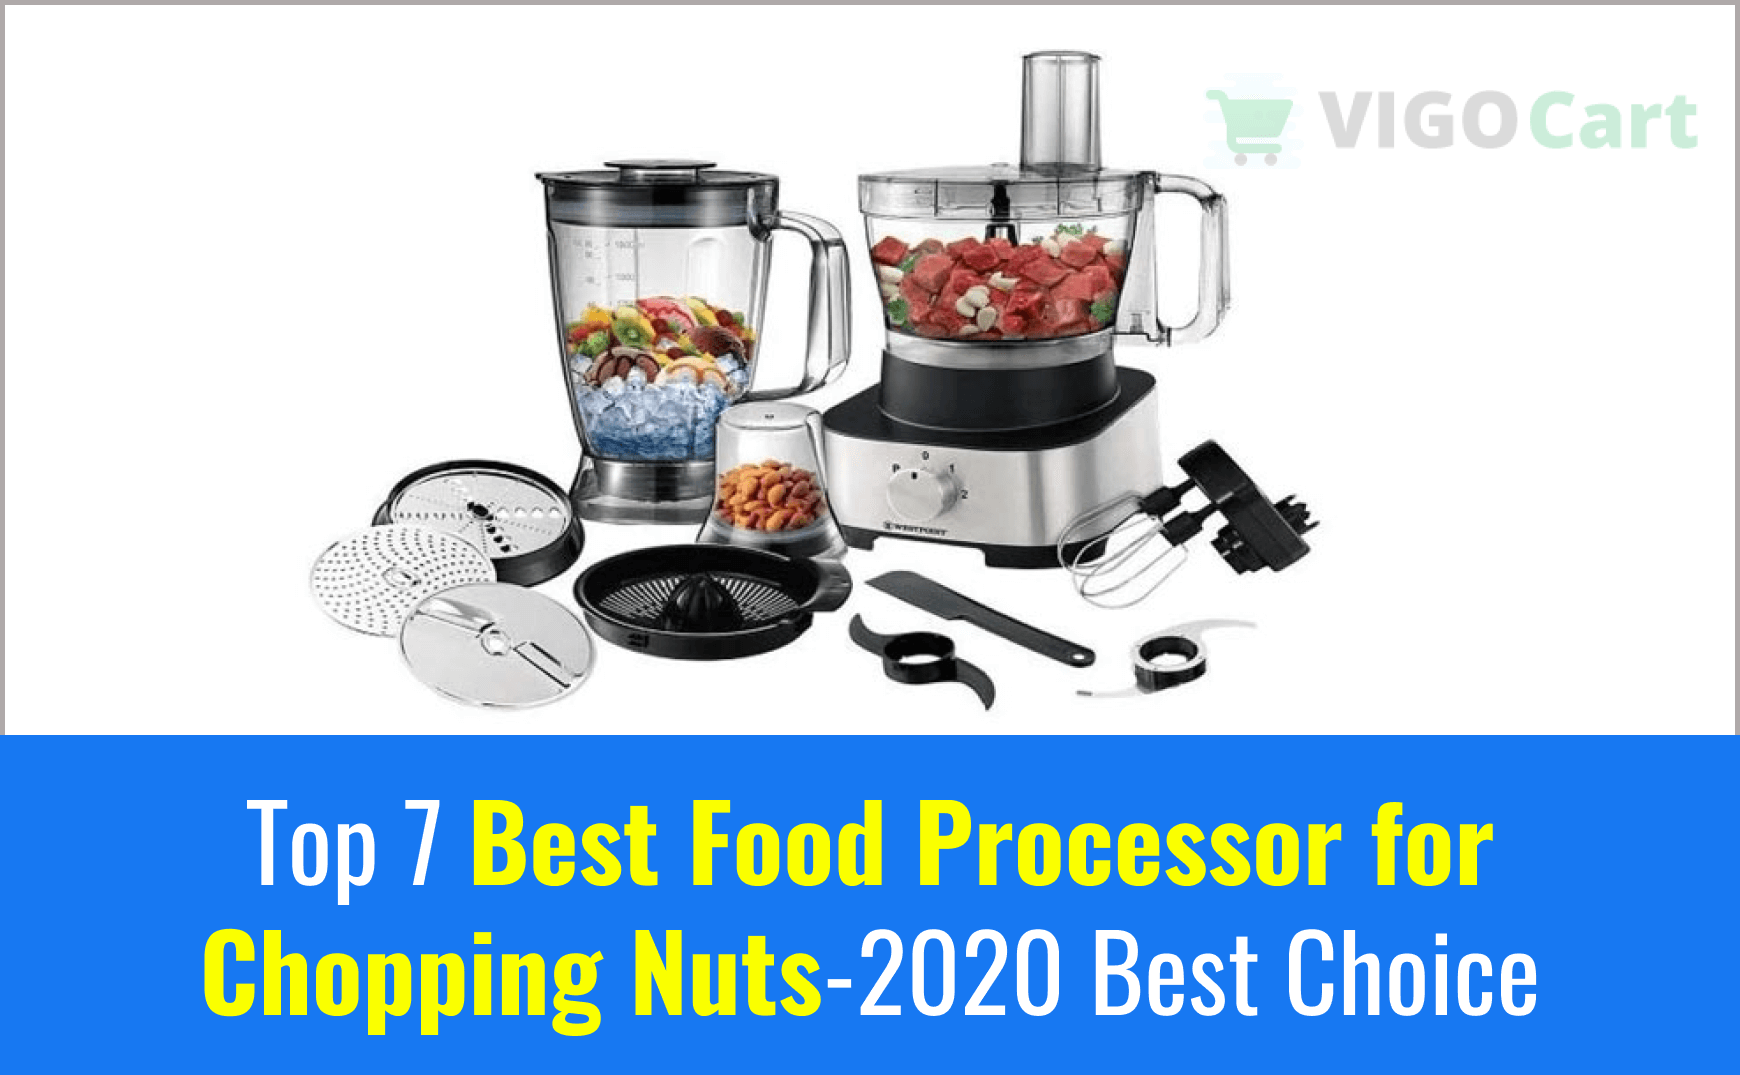 Top 7 Best Food Processor for Chopping Nuts